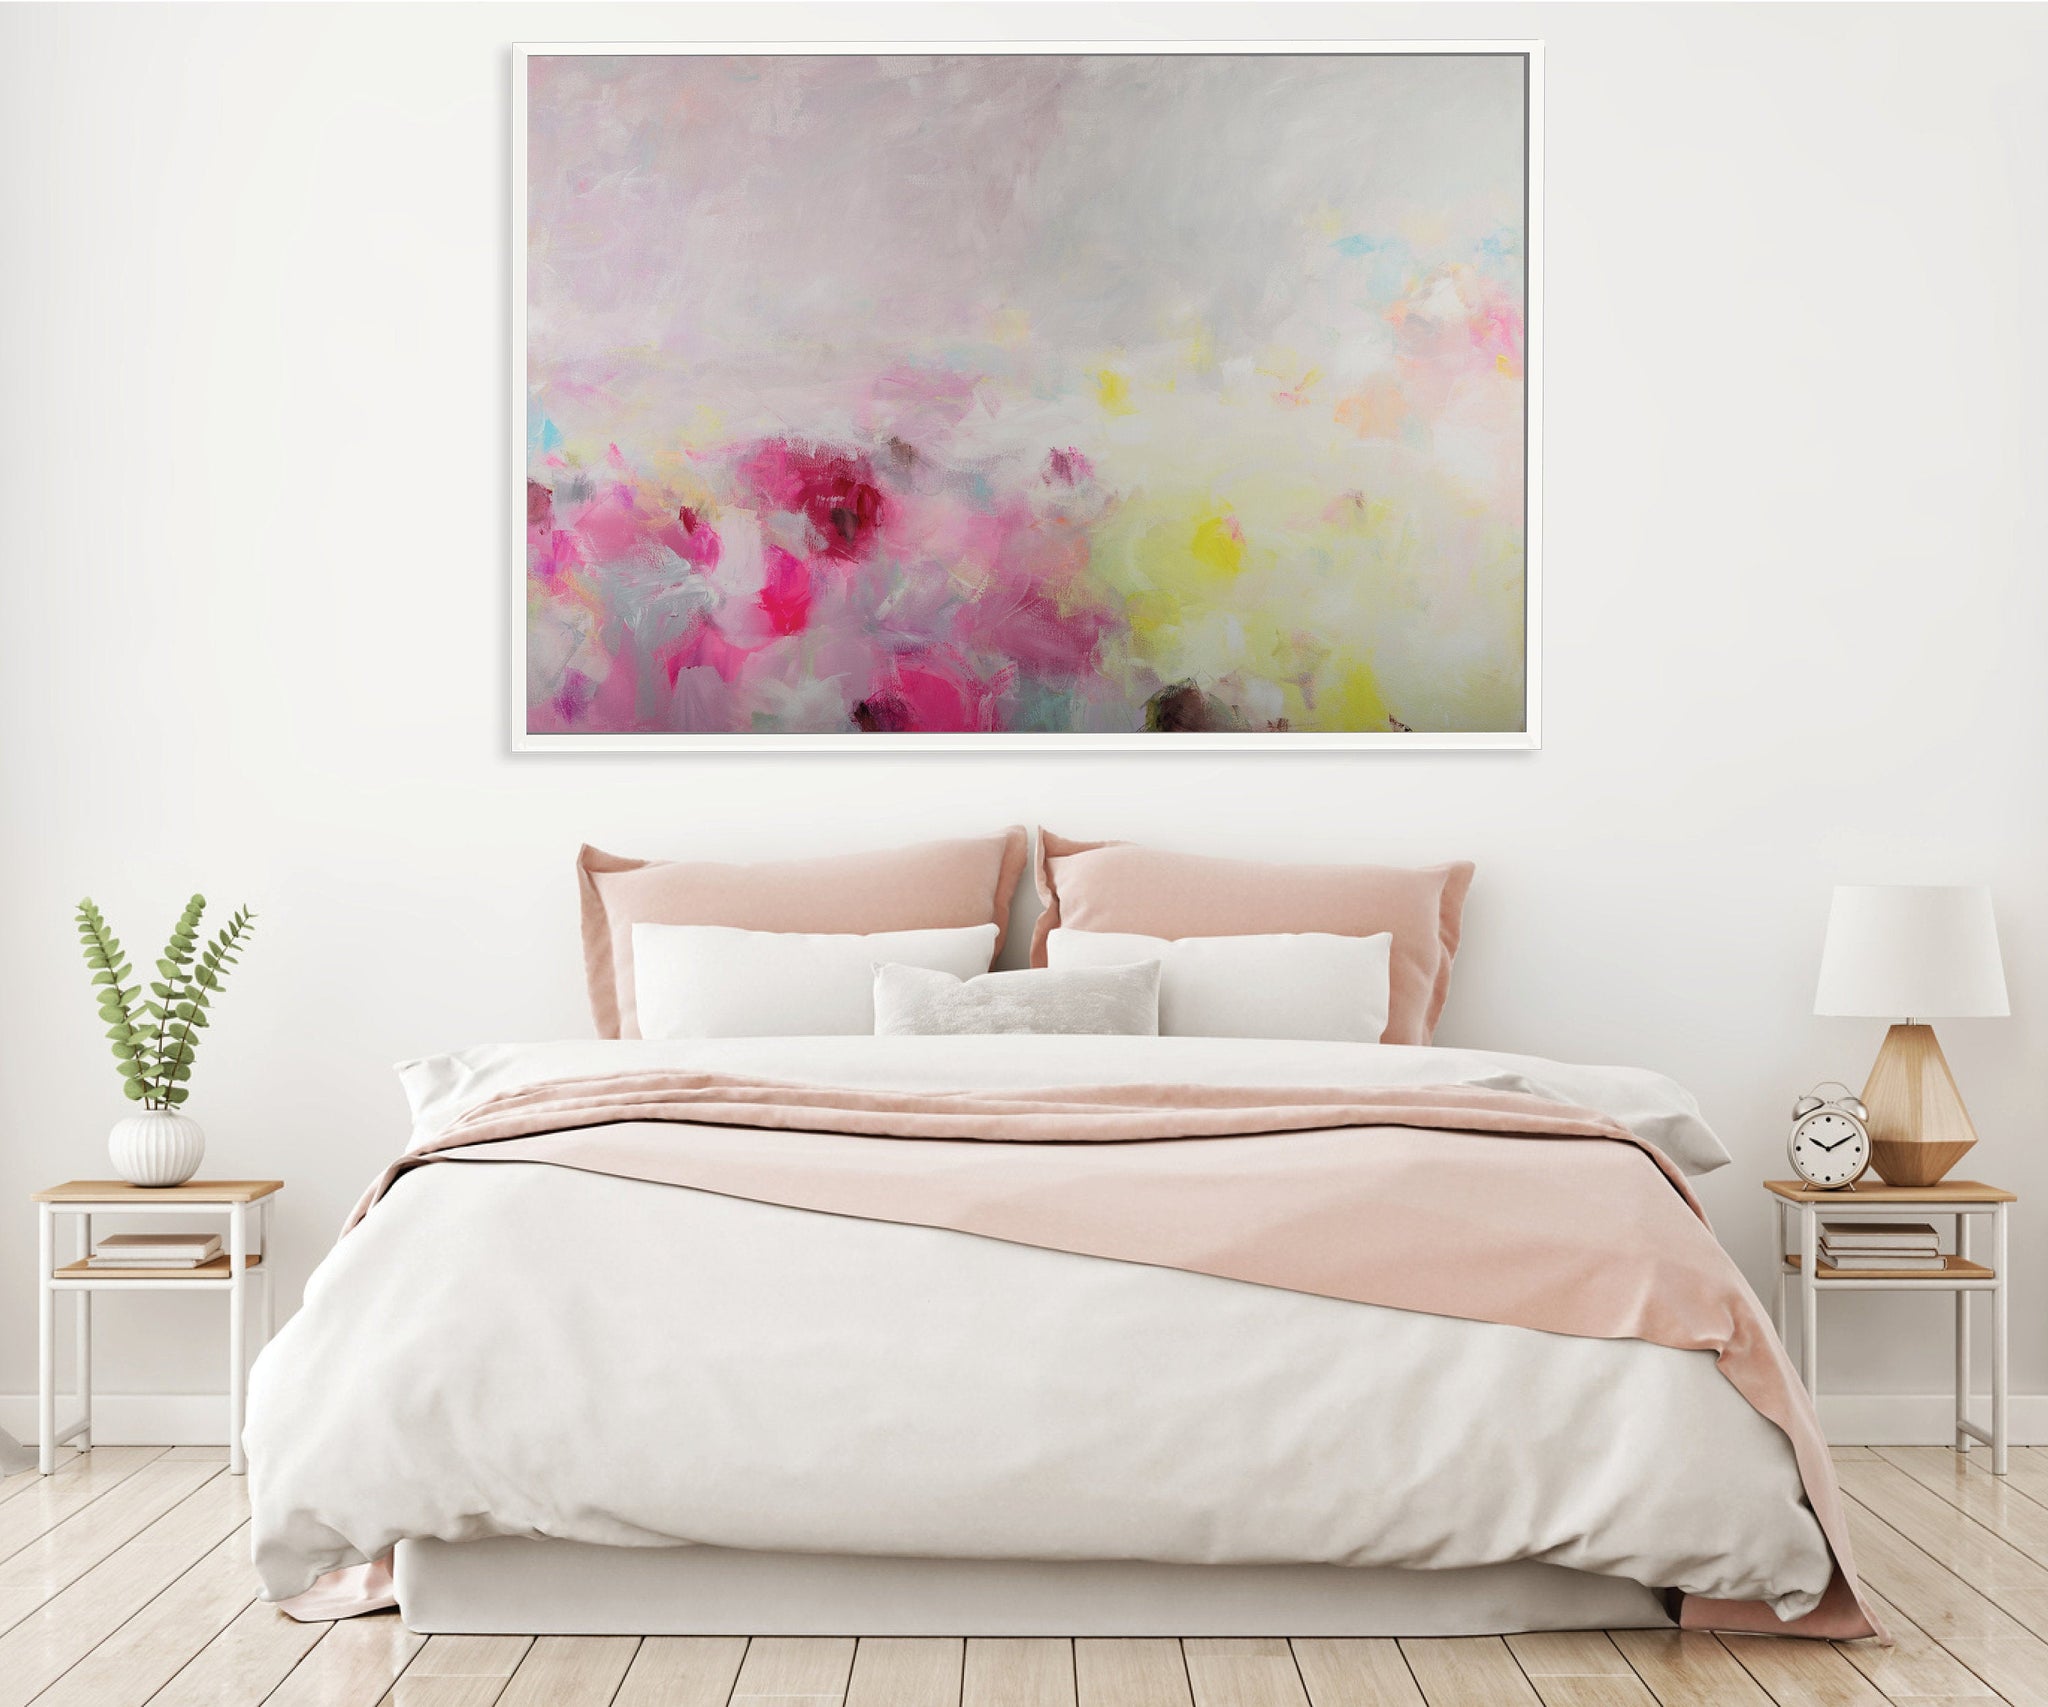 Extra large modern pink wall art, Landscape print, large abstract painting print, pink and yellow painting, acrylic abstract painting - camilomattis.com